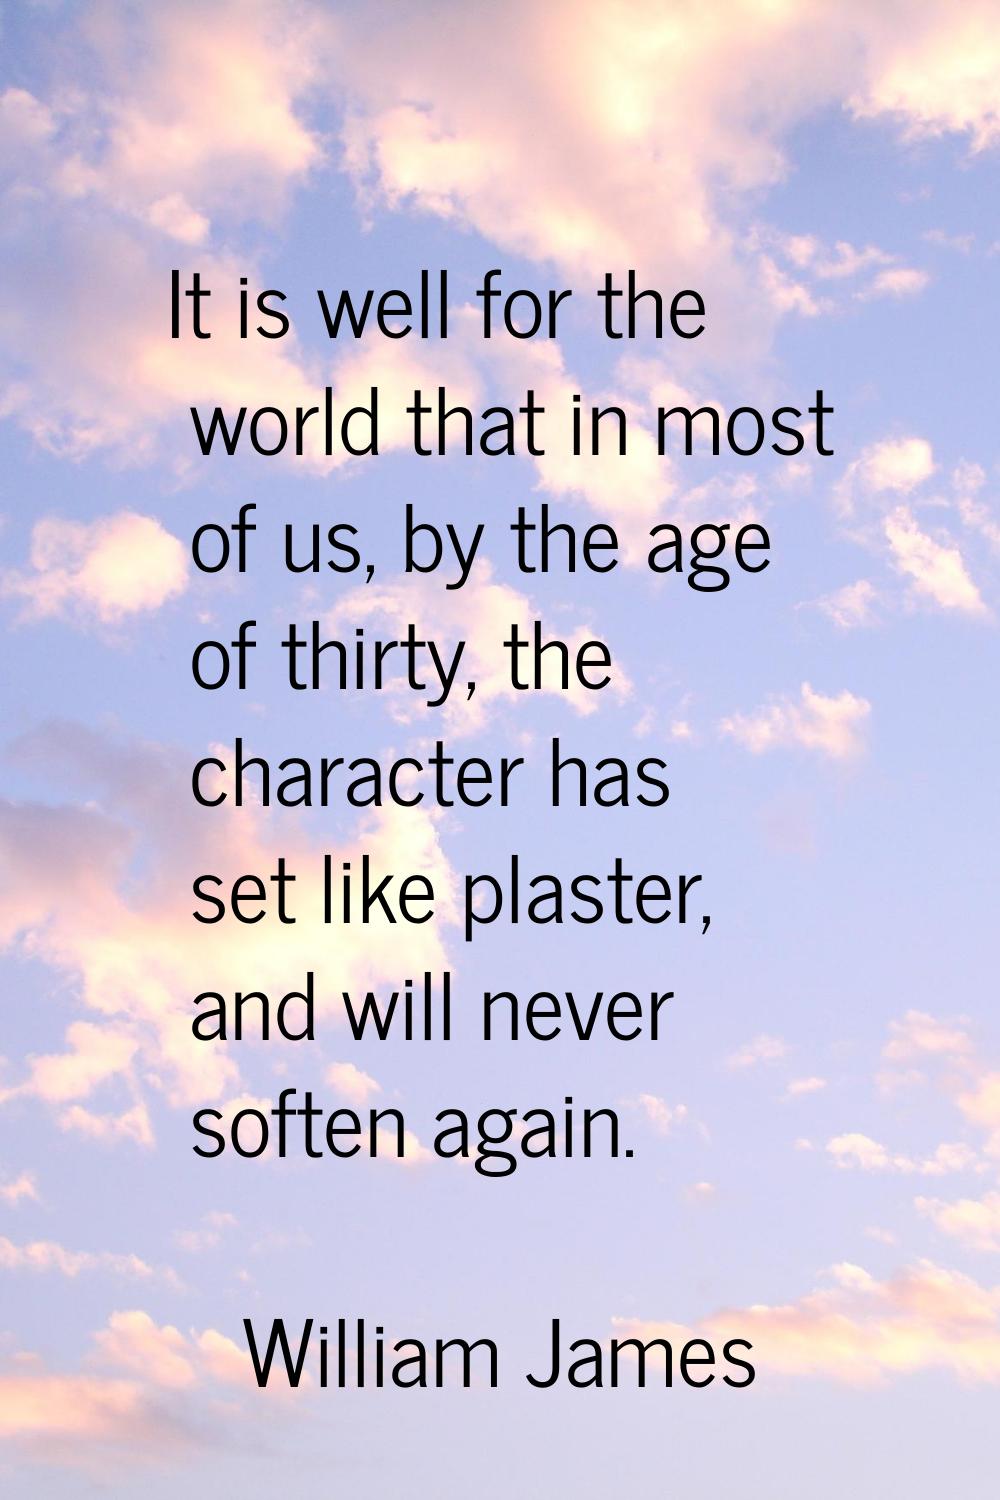 It is well for the world that in most of us, by the age of thirty, the character has set like plast